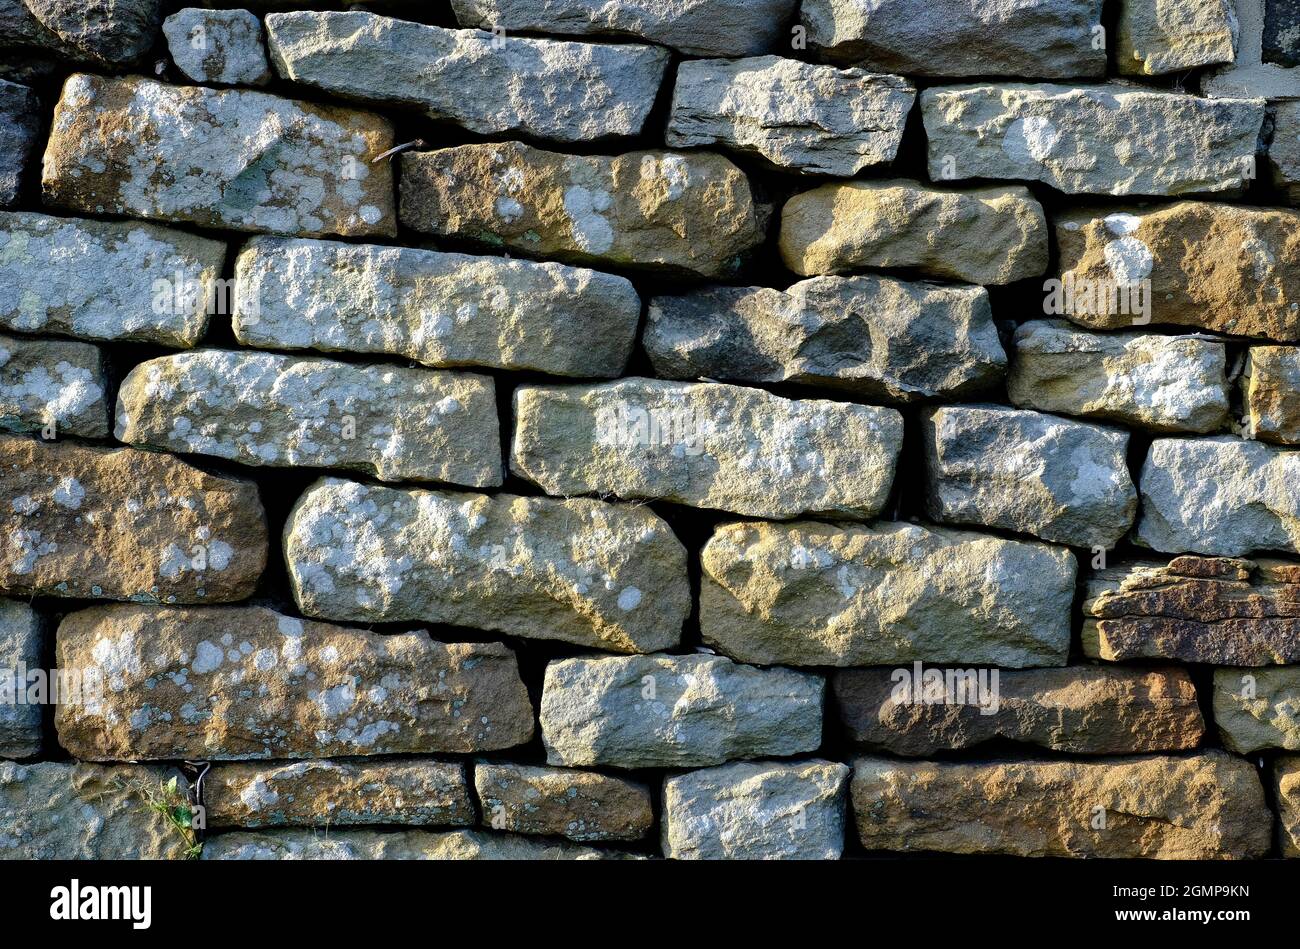 neat stone wall, glaisdale, north yorkshire, england Stock Photo